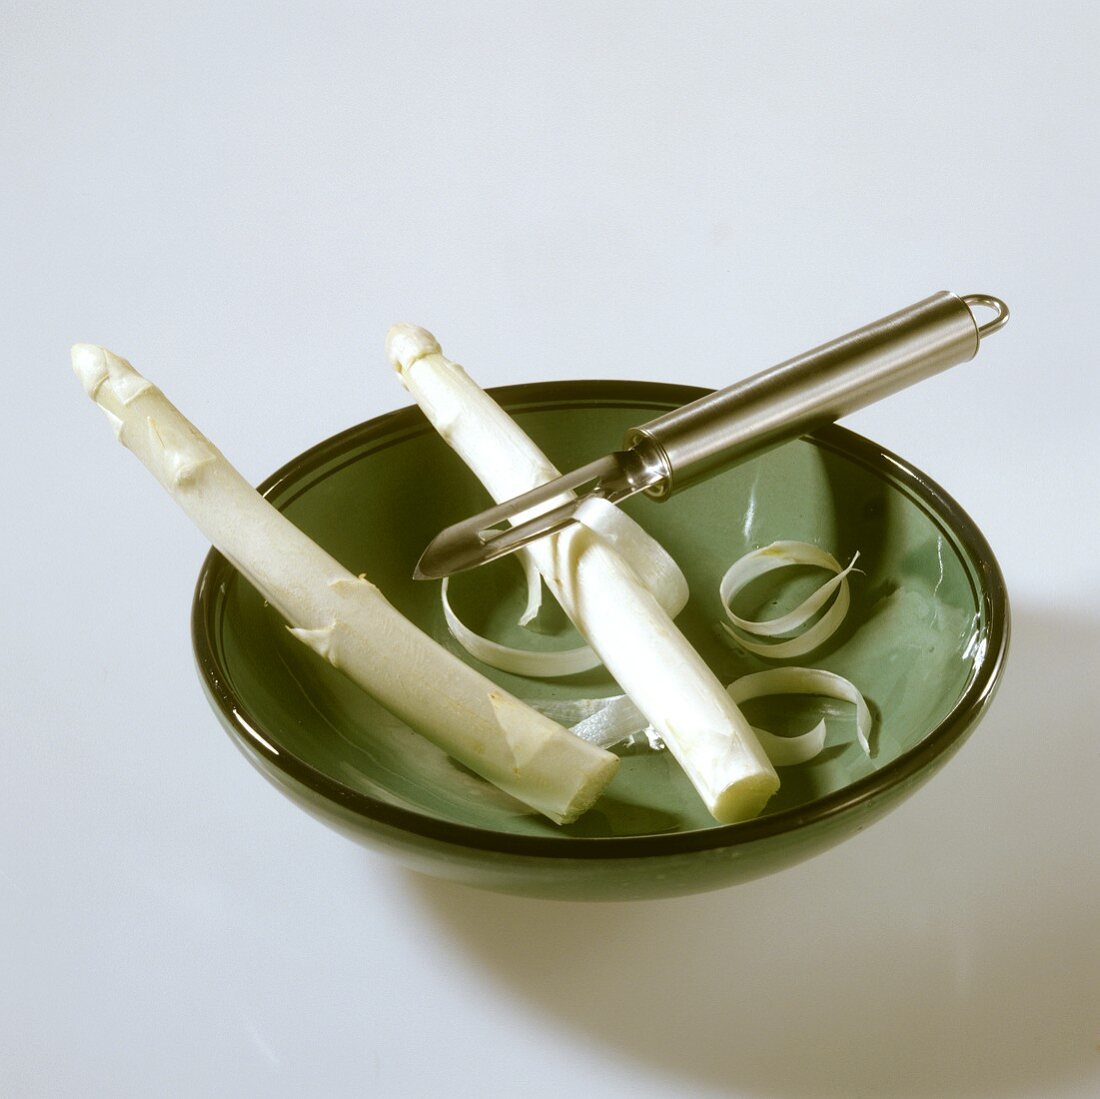 Two spears of white asparagus with vegetable peeler